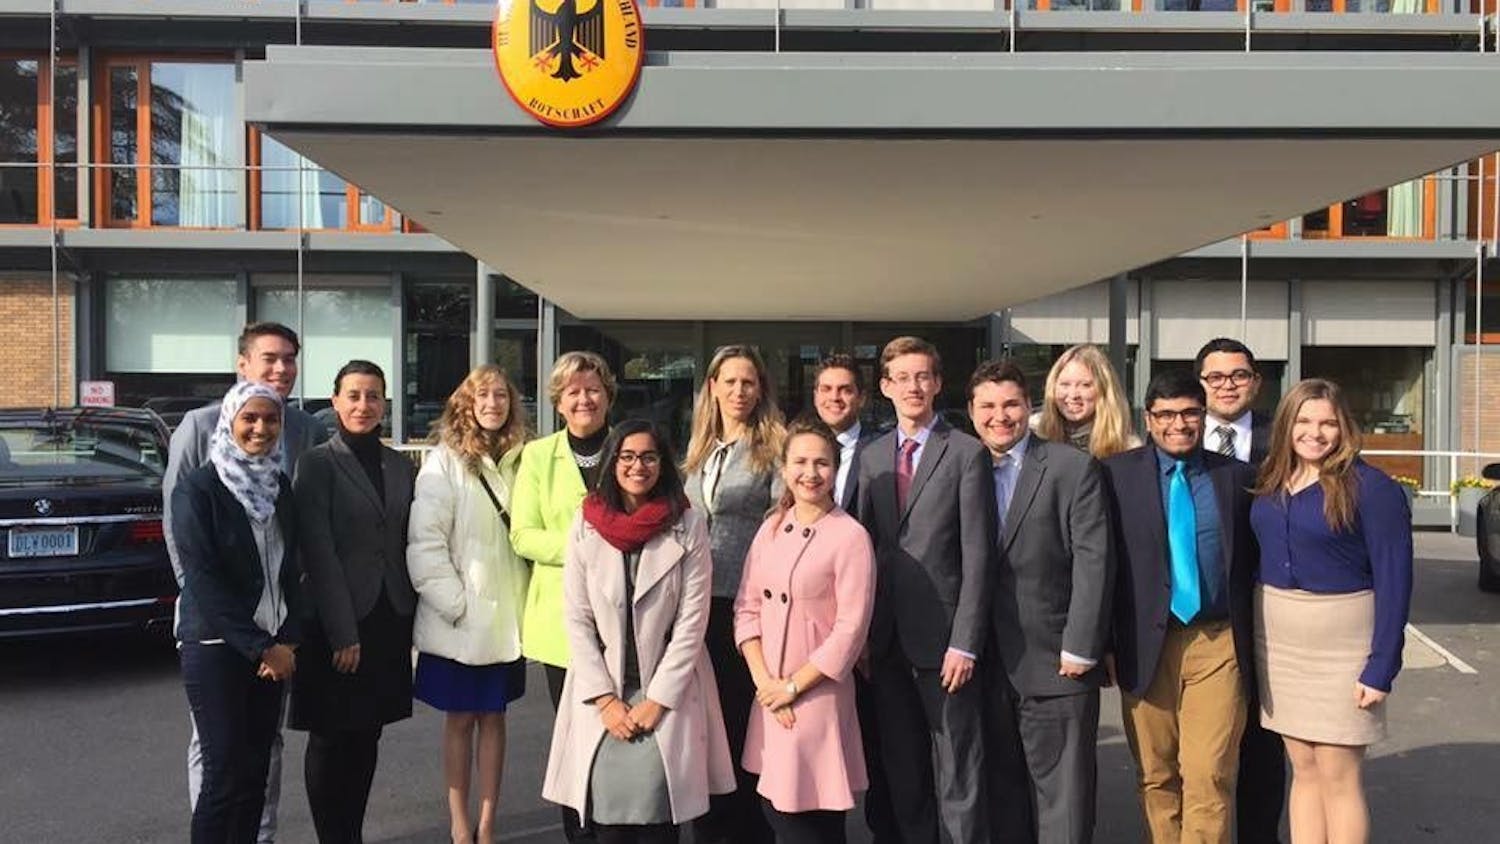 The student leadership team and German Embassy officials. Students&nbsp;met with some of the foreign service officers to discuss Germany's agenda and priorities for the G20 Leaders Summit in 2017.&nbsp;